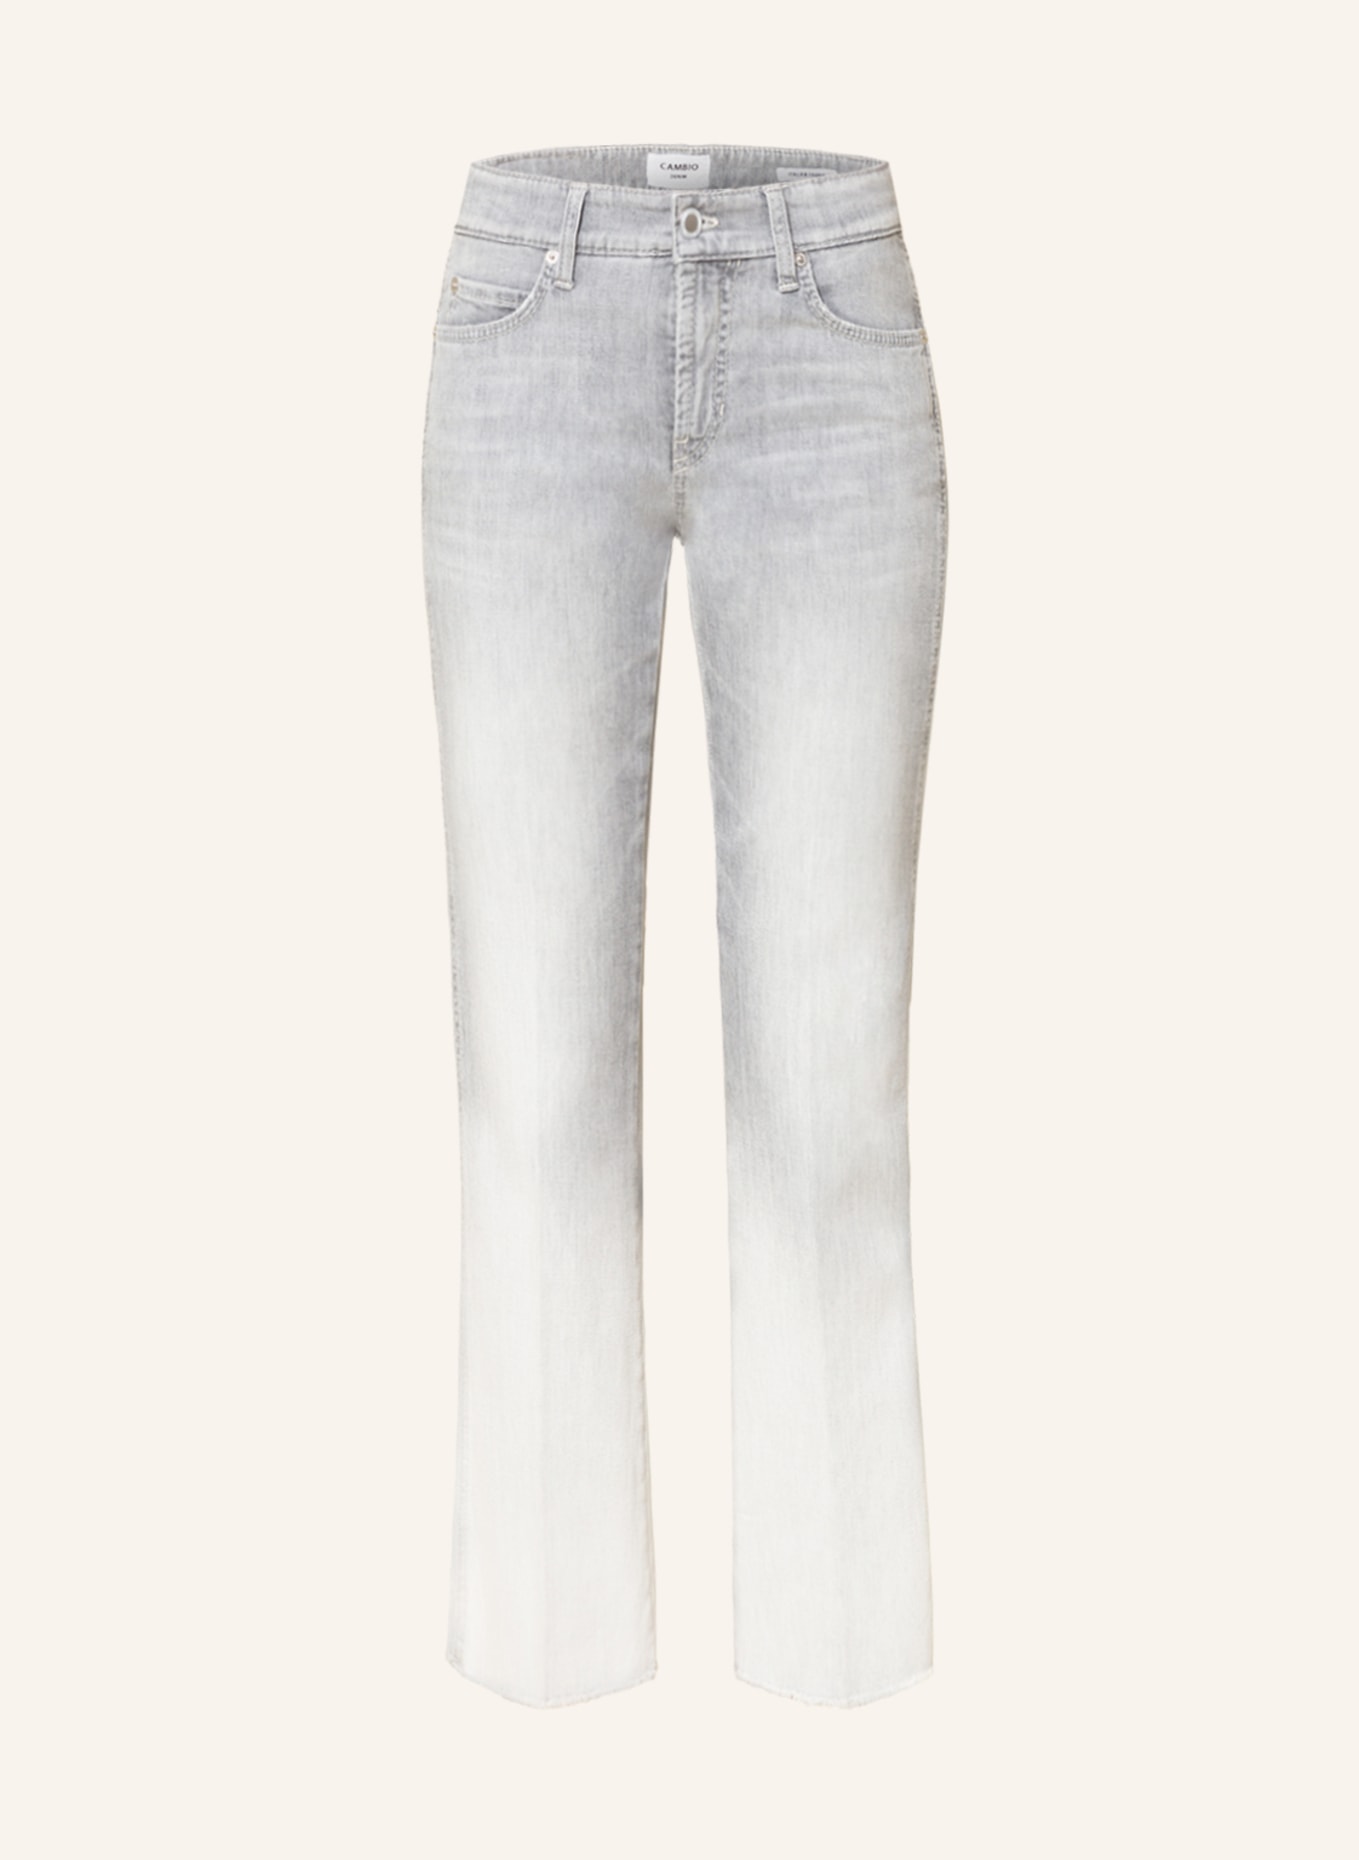 CAMBIO Bootcut jeans FRANCESCA, Color: 5323 summer degrade fringed he (Image 1)